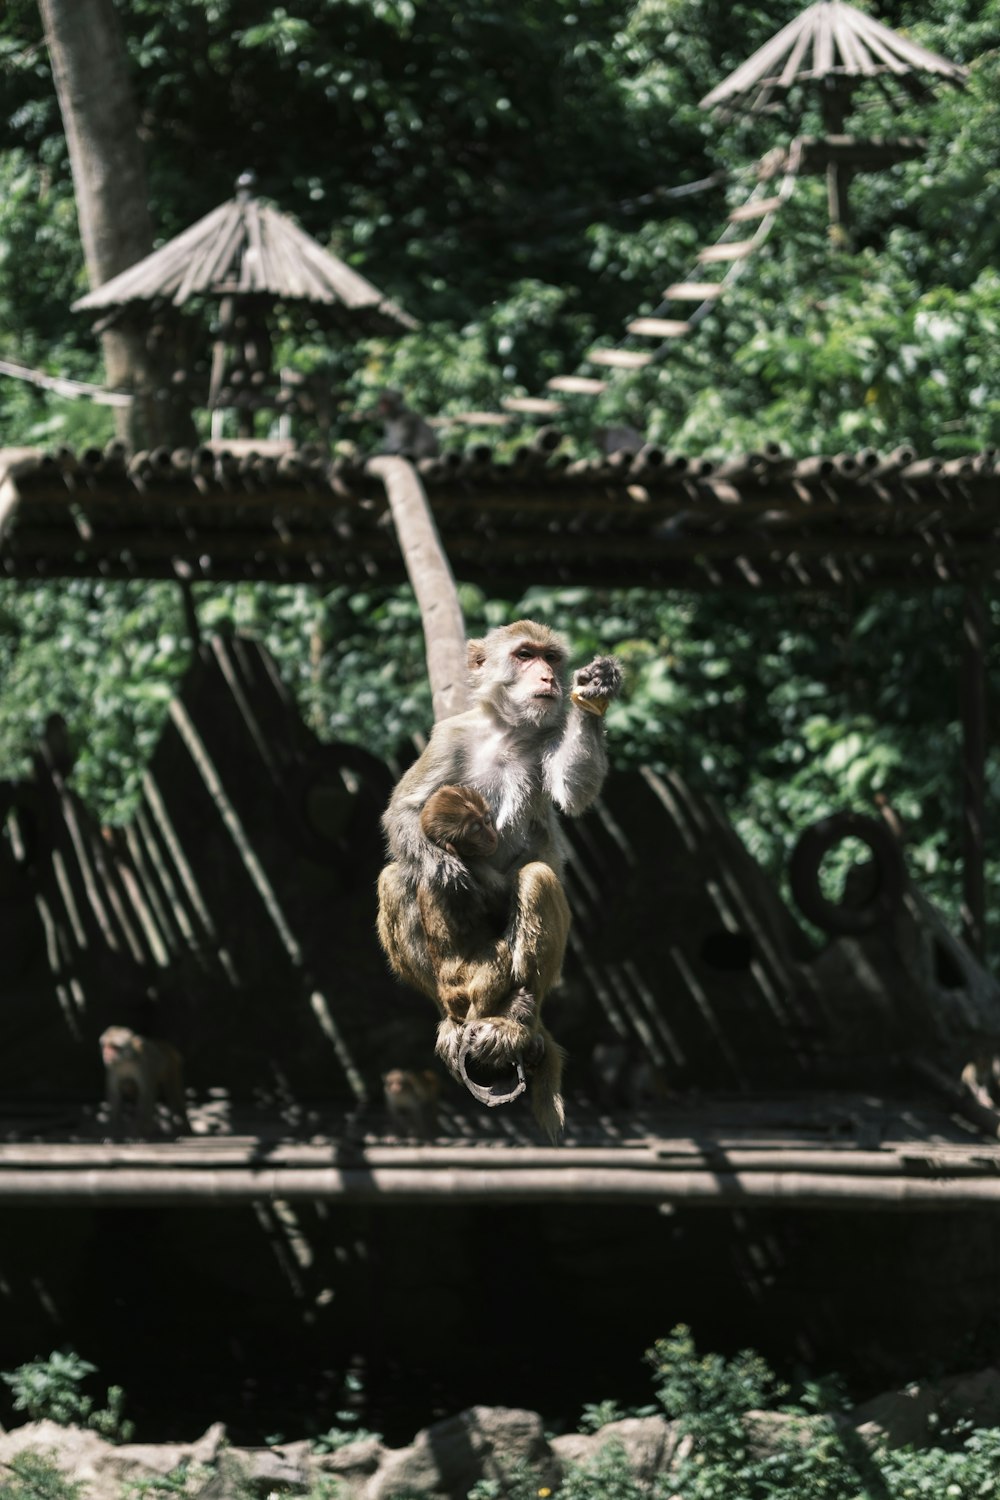 a monkey jumping in the air on a wooden platform